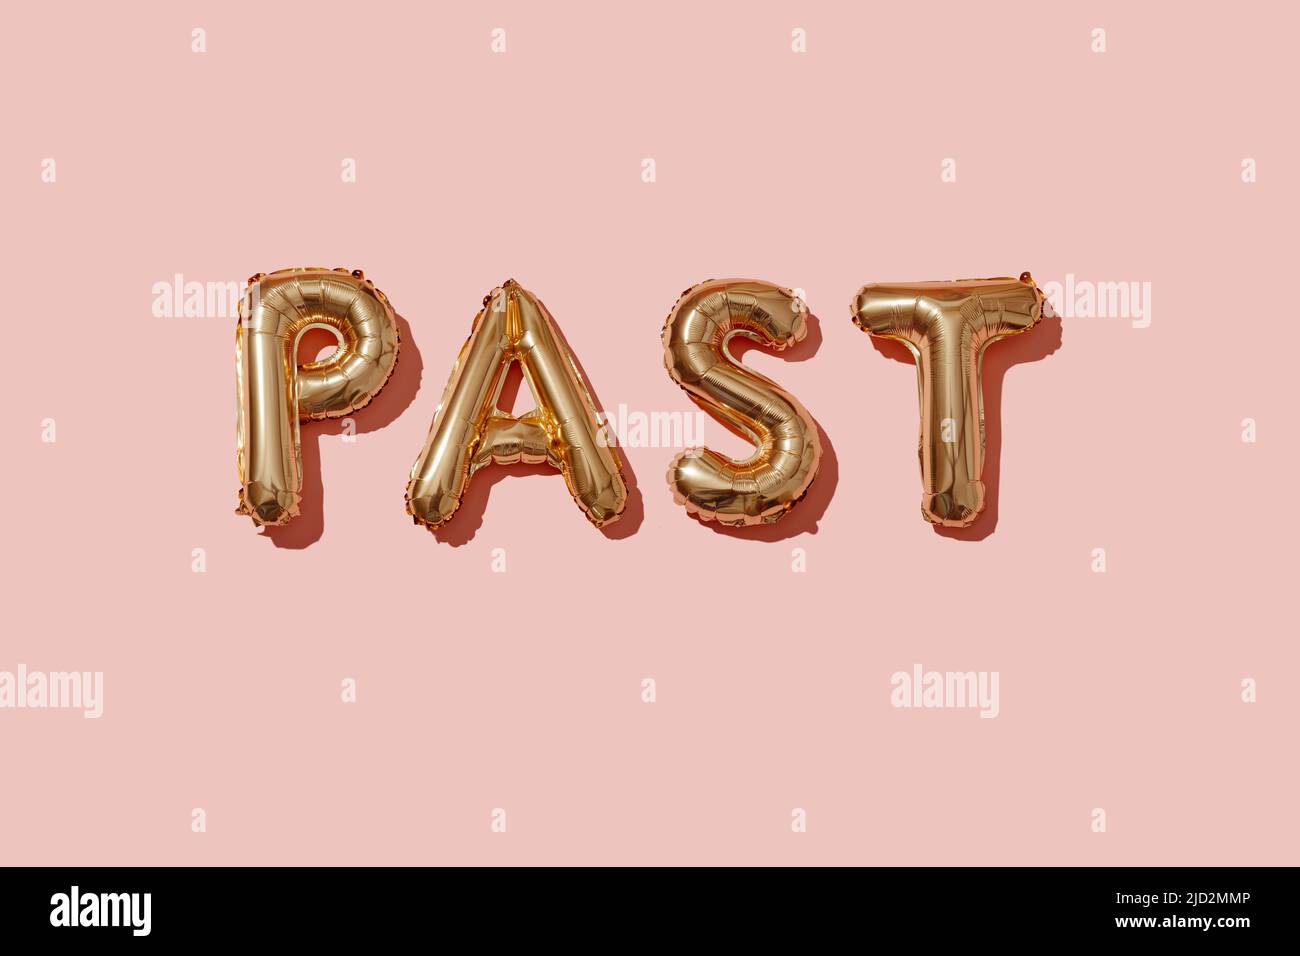 some golden letter-shaped balloons forming the word past on a pink background Stock Photo